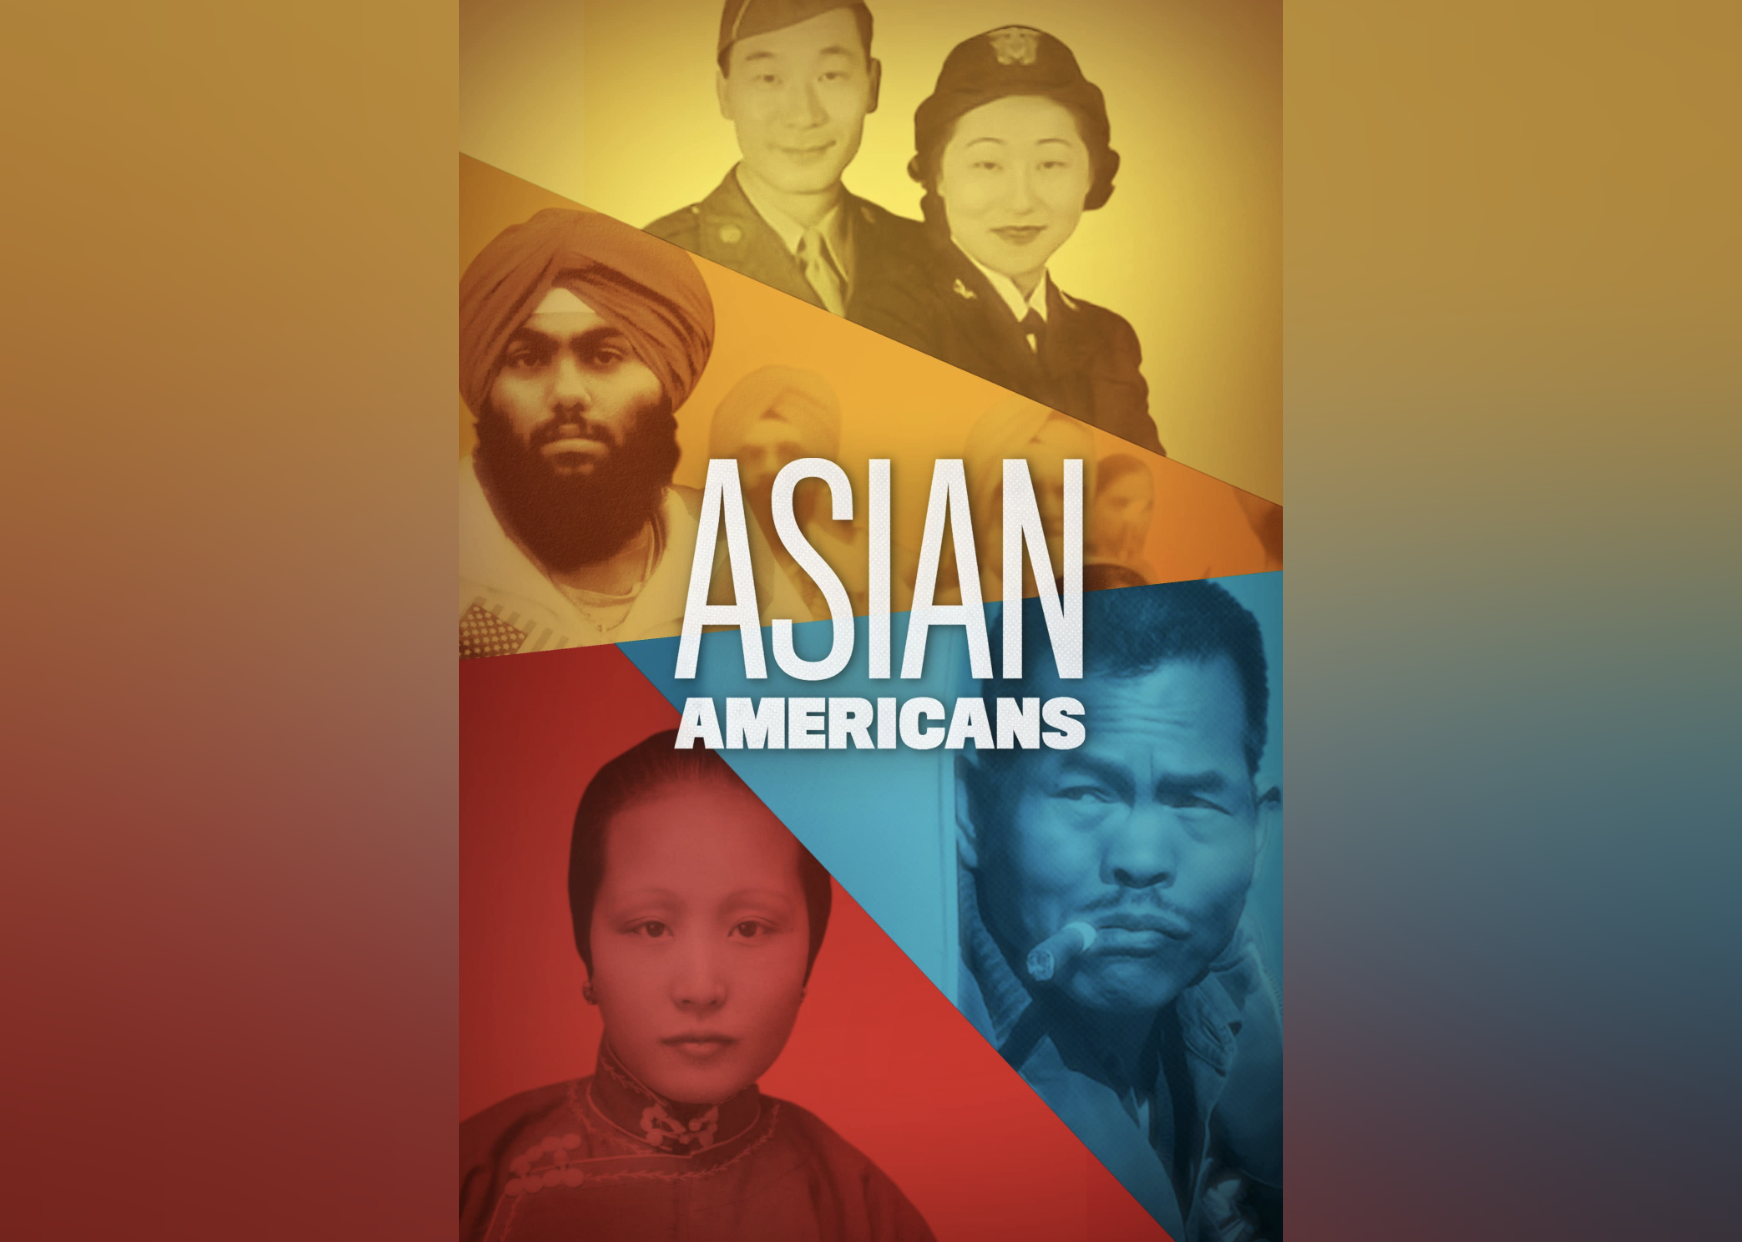 The artwork for the series "Asian Americans".